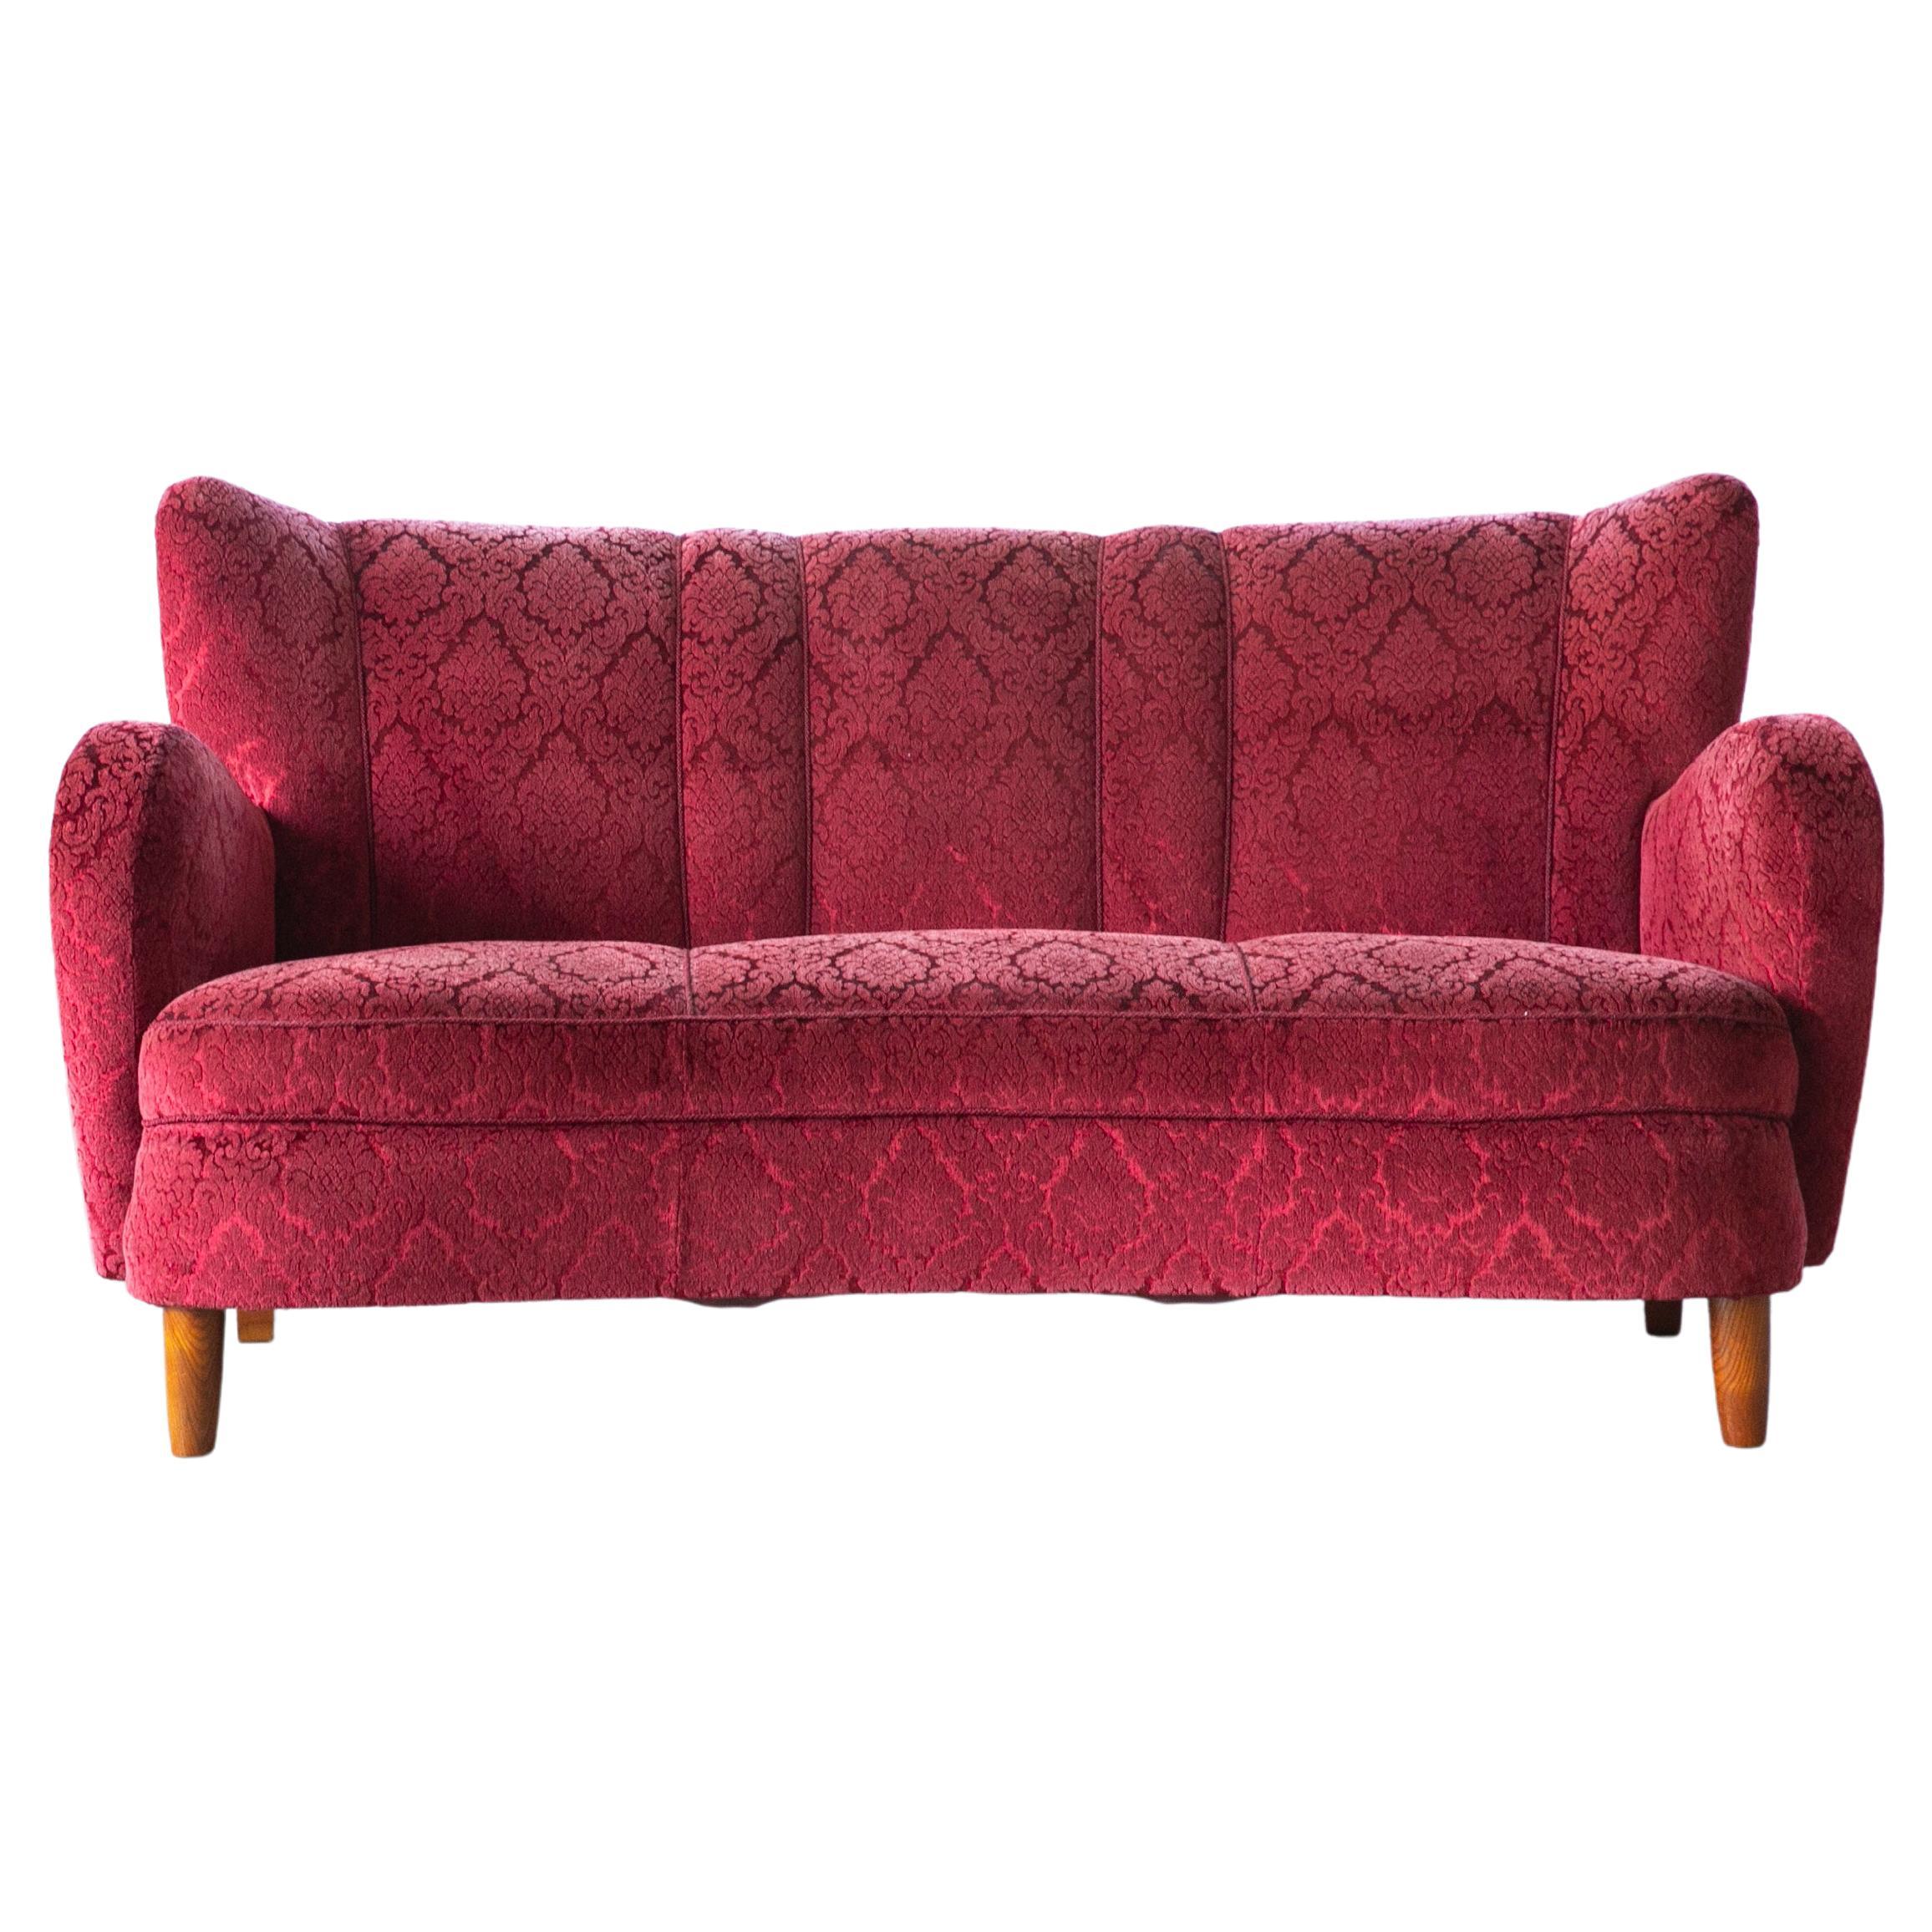 Danish 1940s Curved Sofa or Loveseat in Red Mohair For Sale